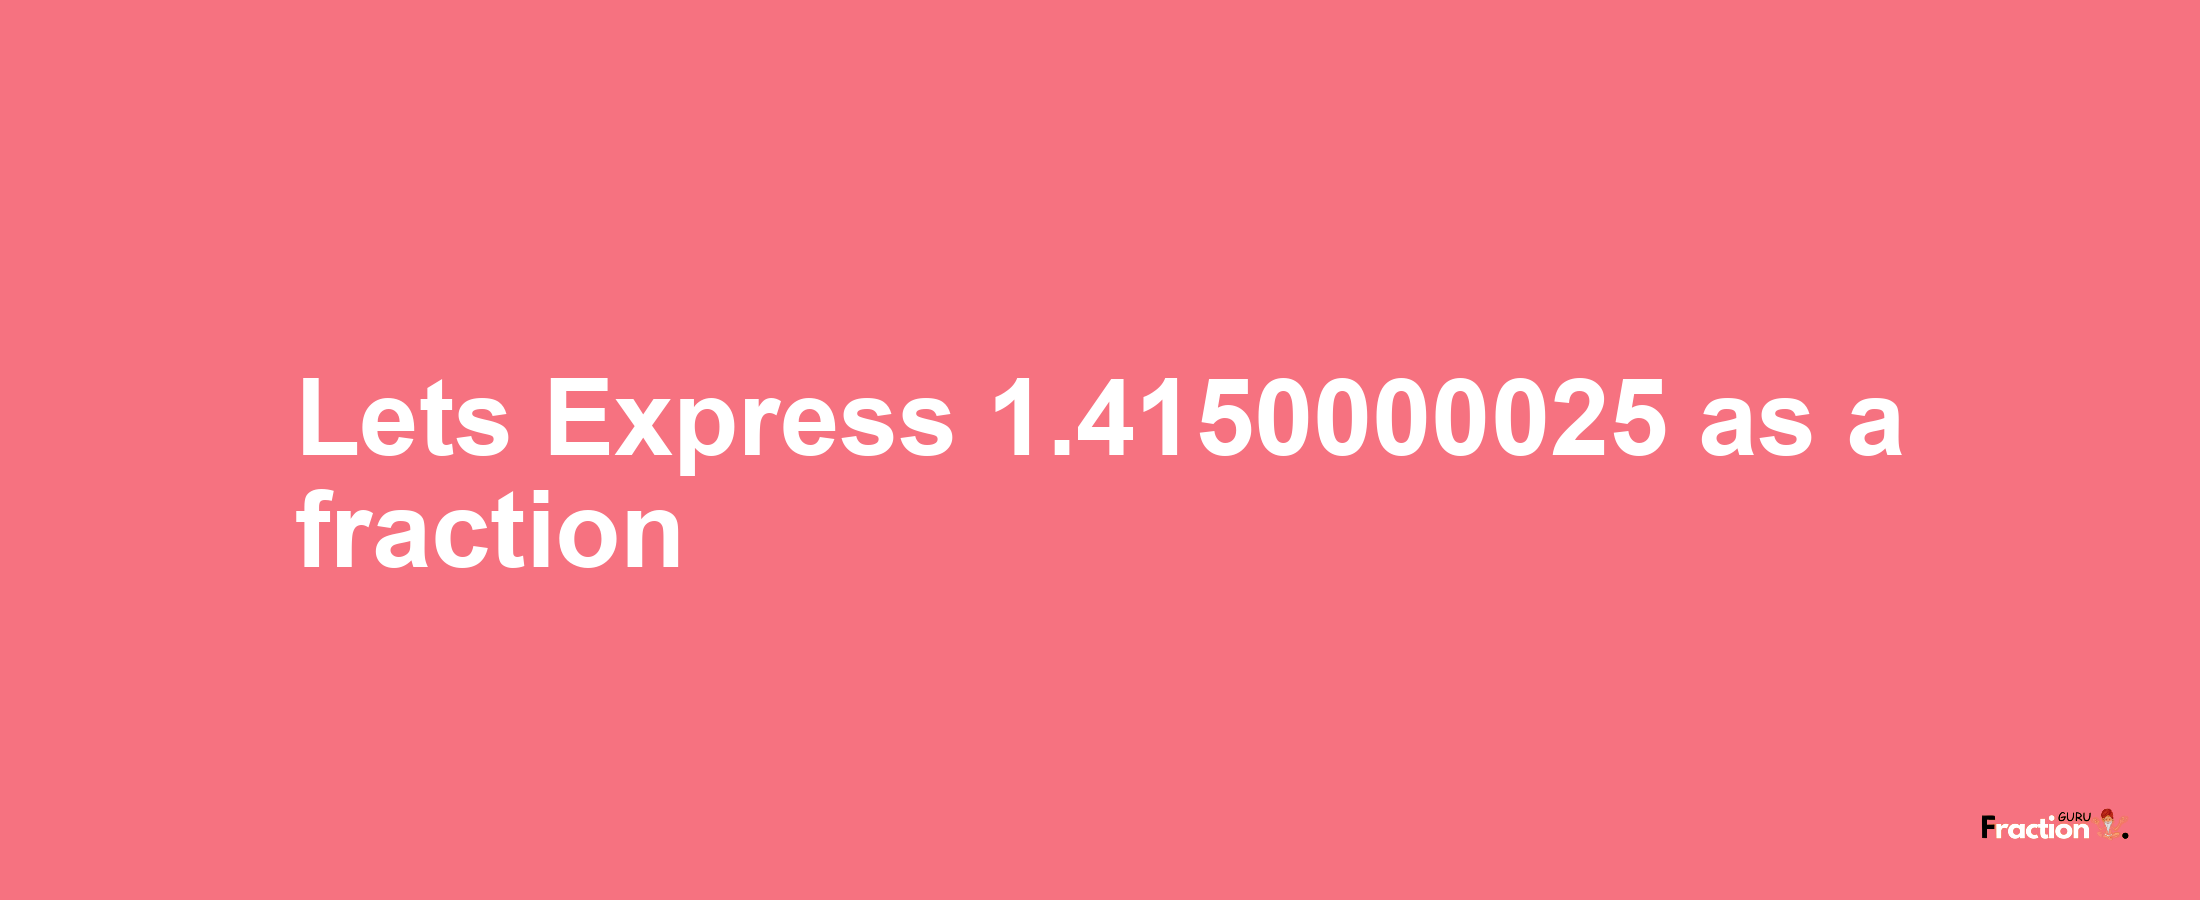 Lets Express 1.4150000025 as afraction